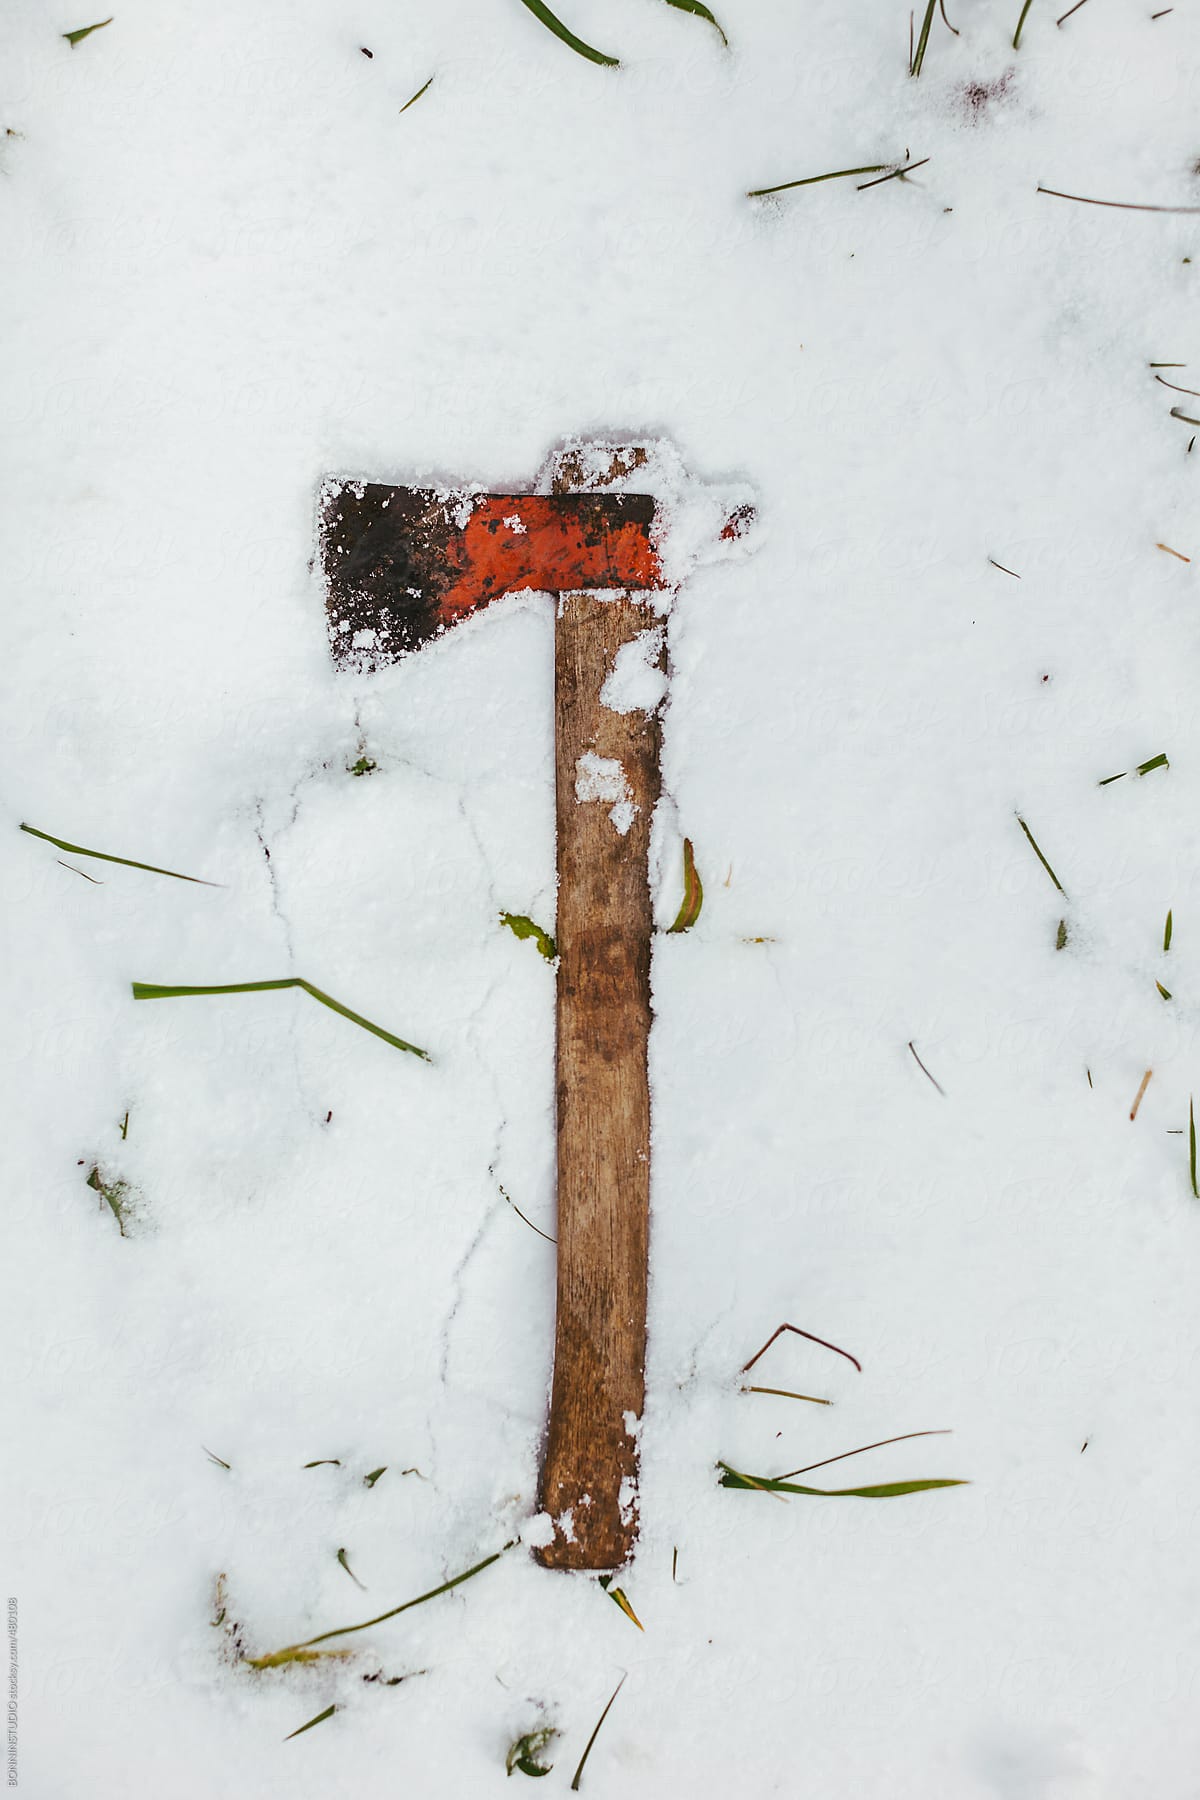 Axe on snow covered grass in winter.